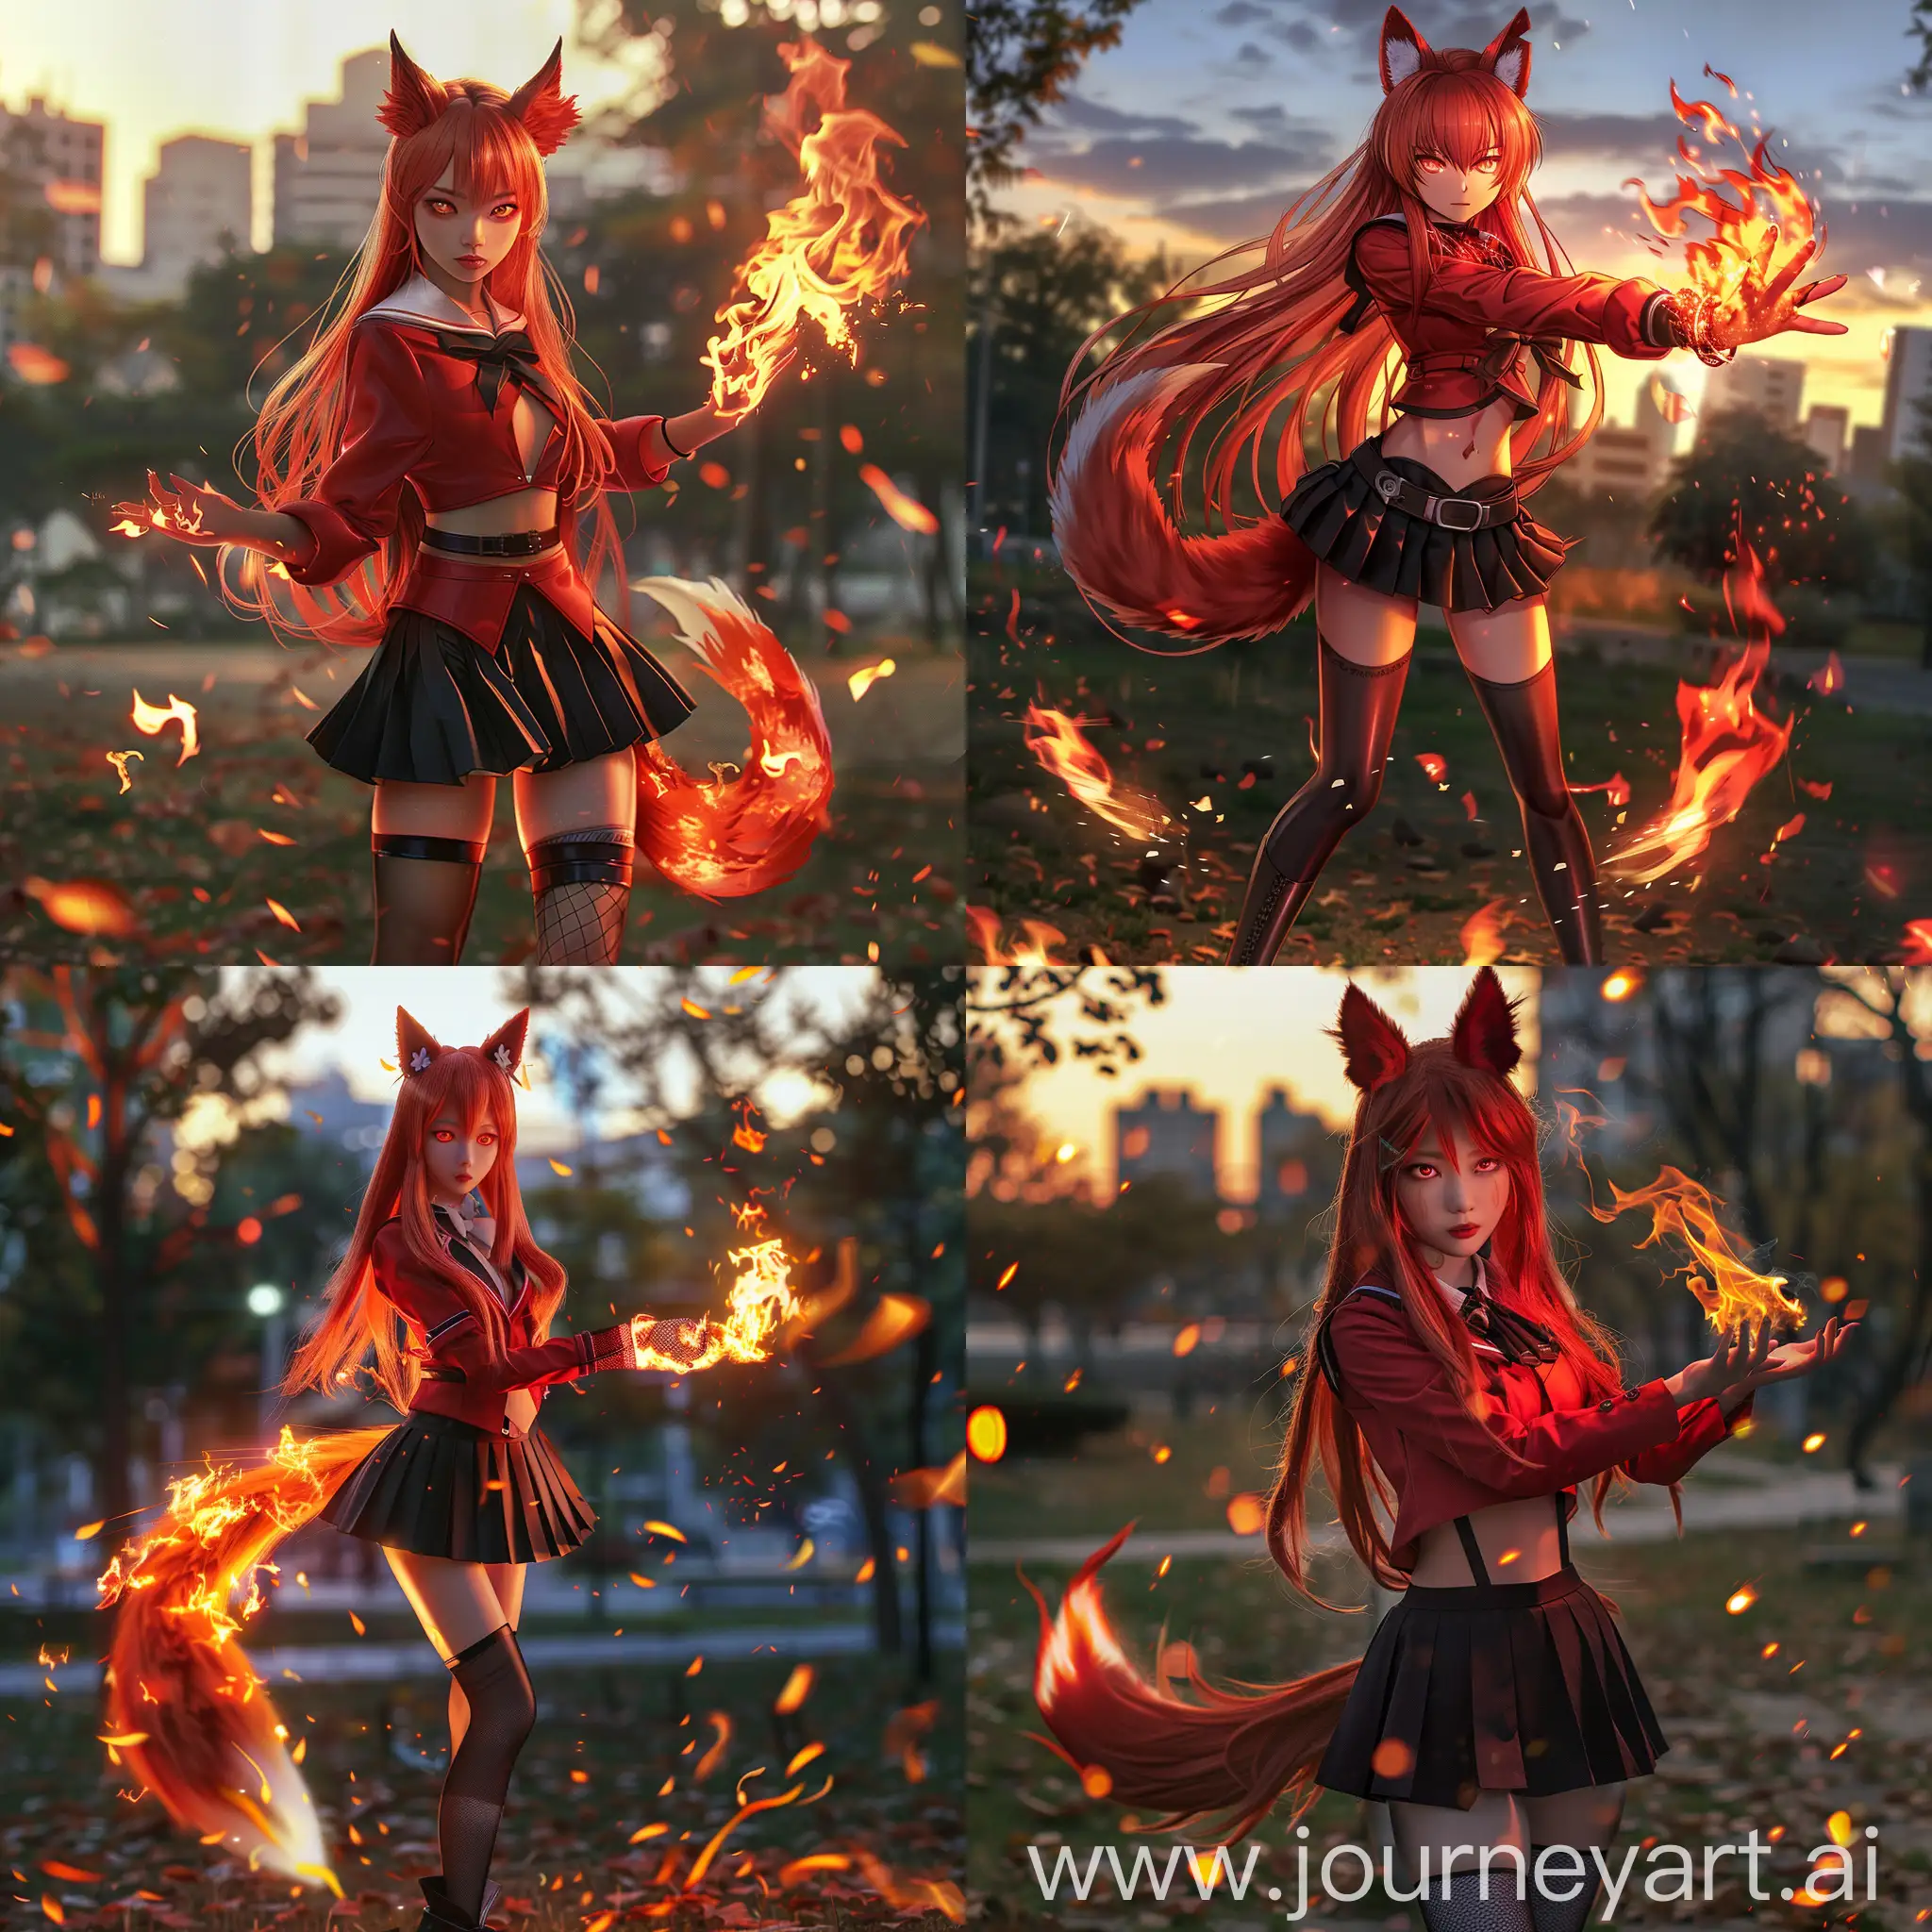 Fiery-Red-Fox-Girl-Casting-Fire-Magic-in-City-Park-at-Sunset